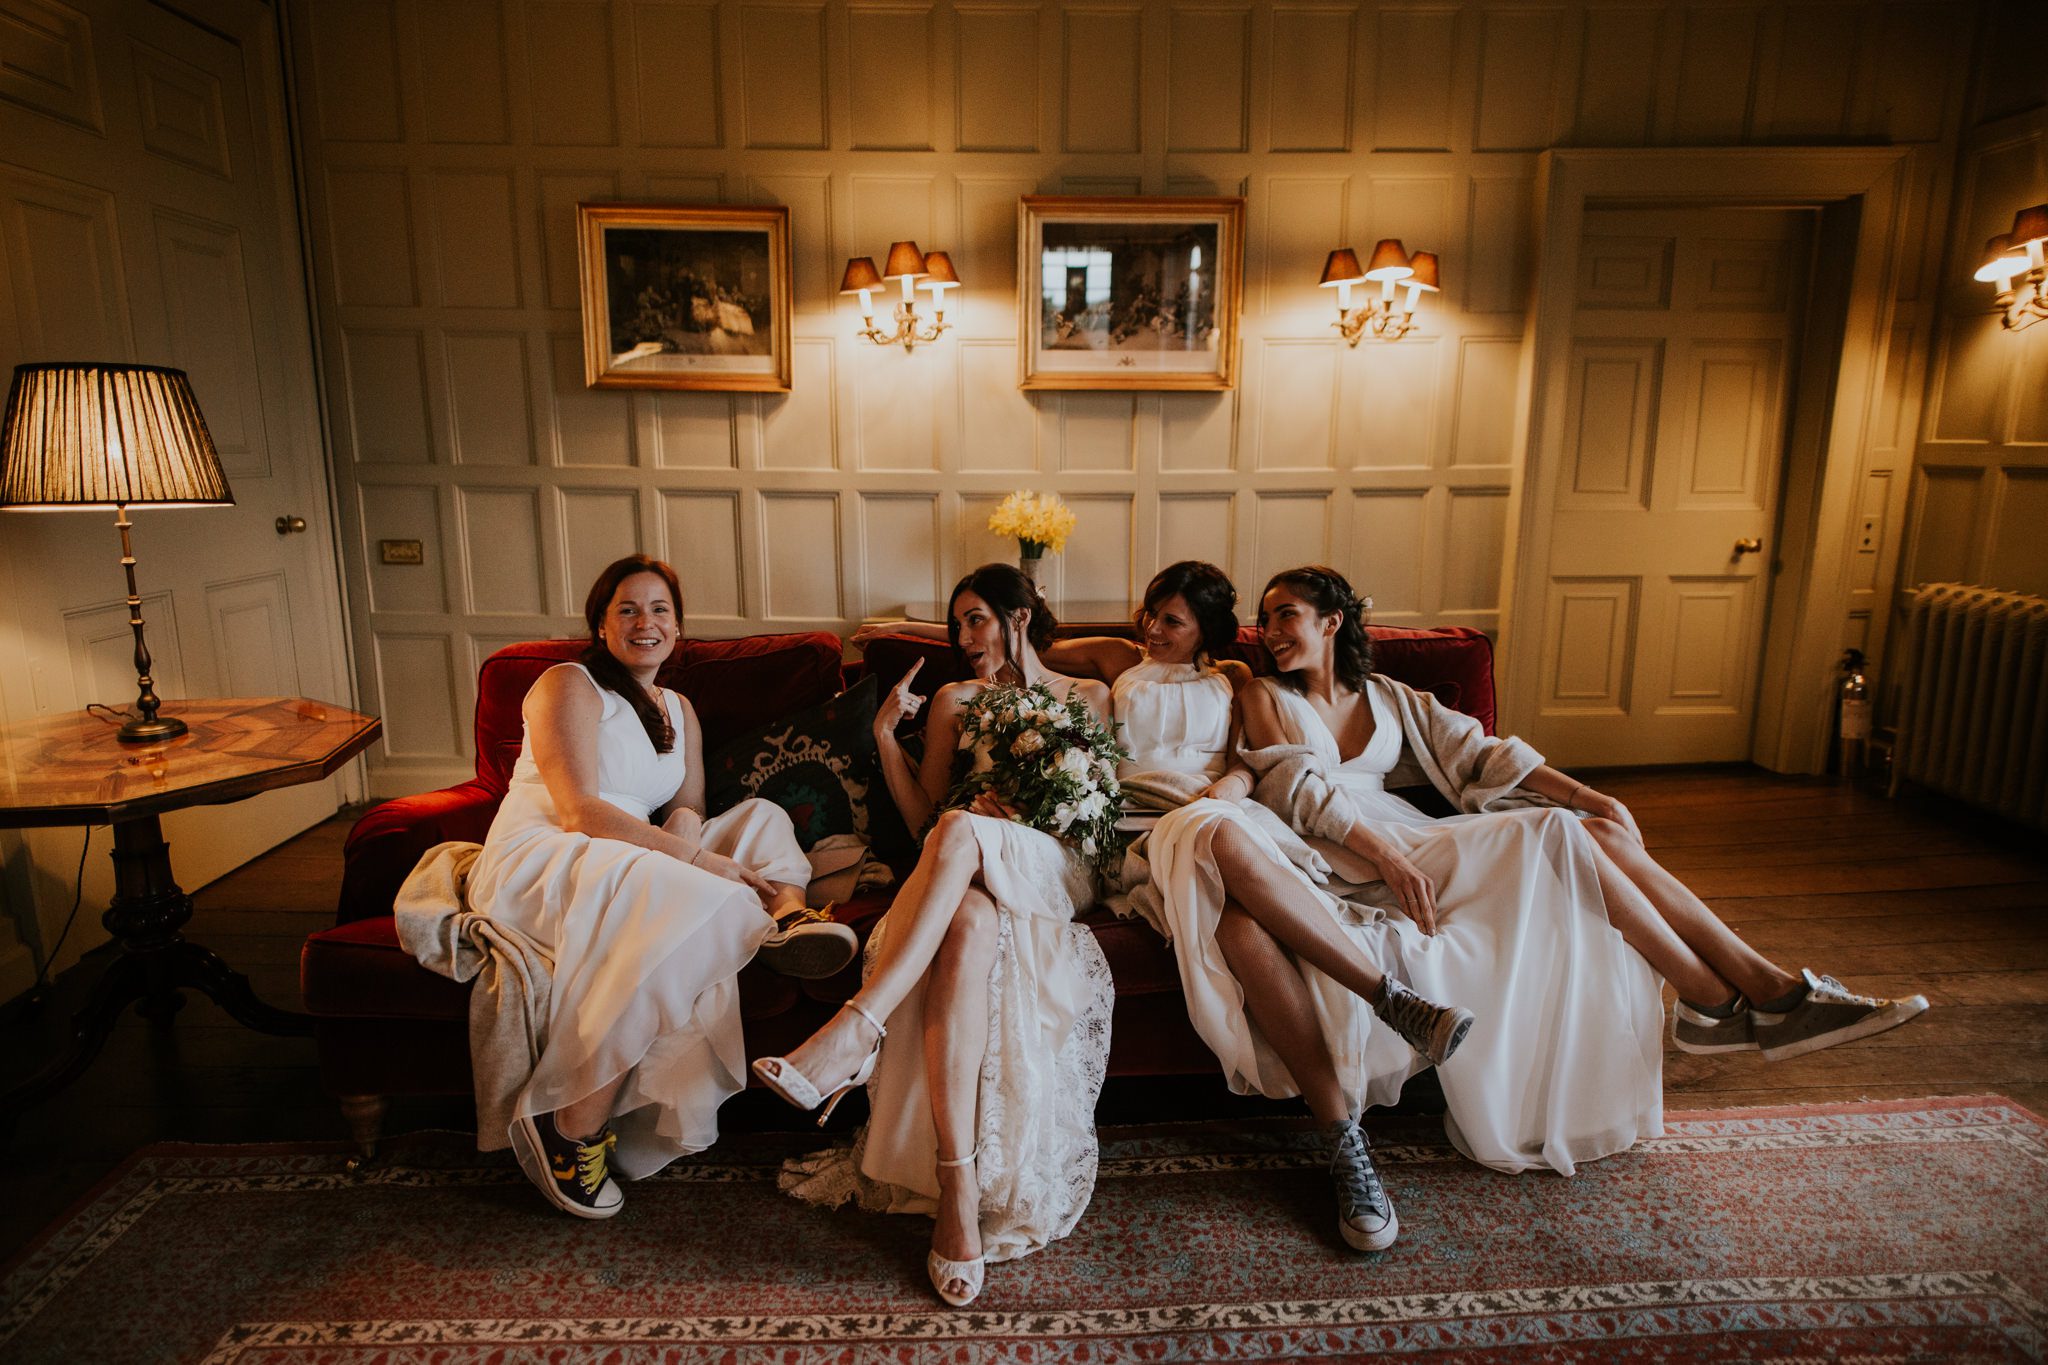 The bride ad her girls at Elmore Court